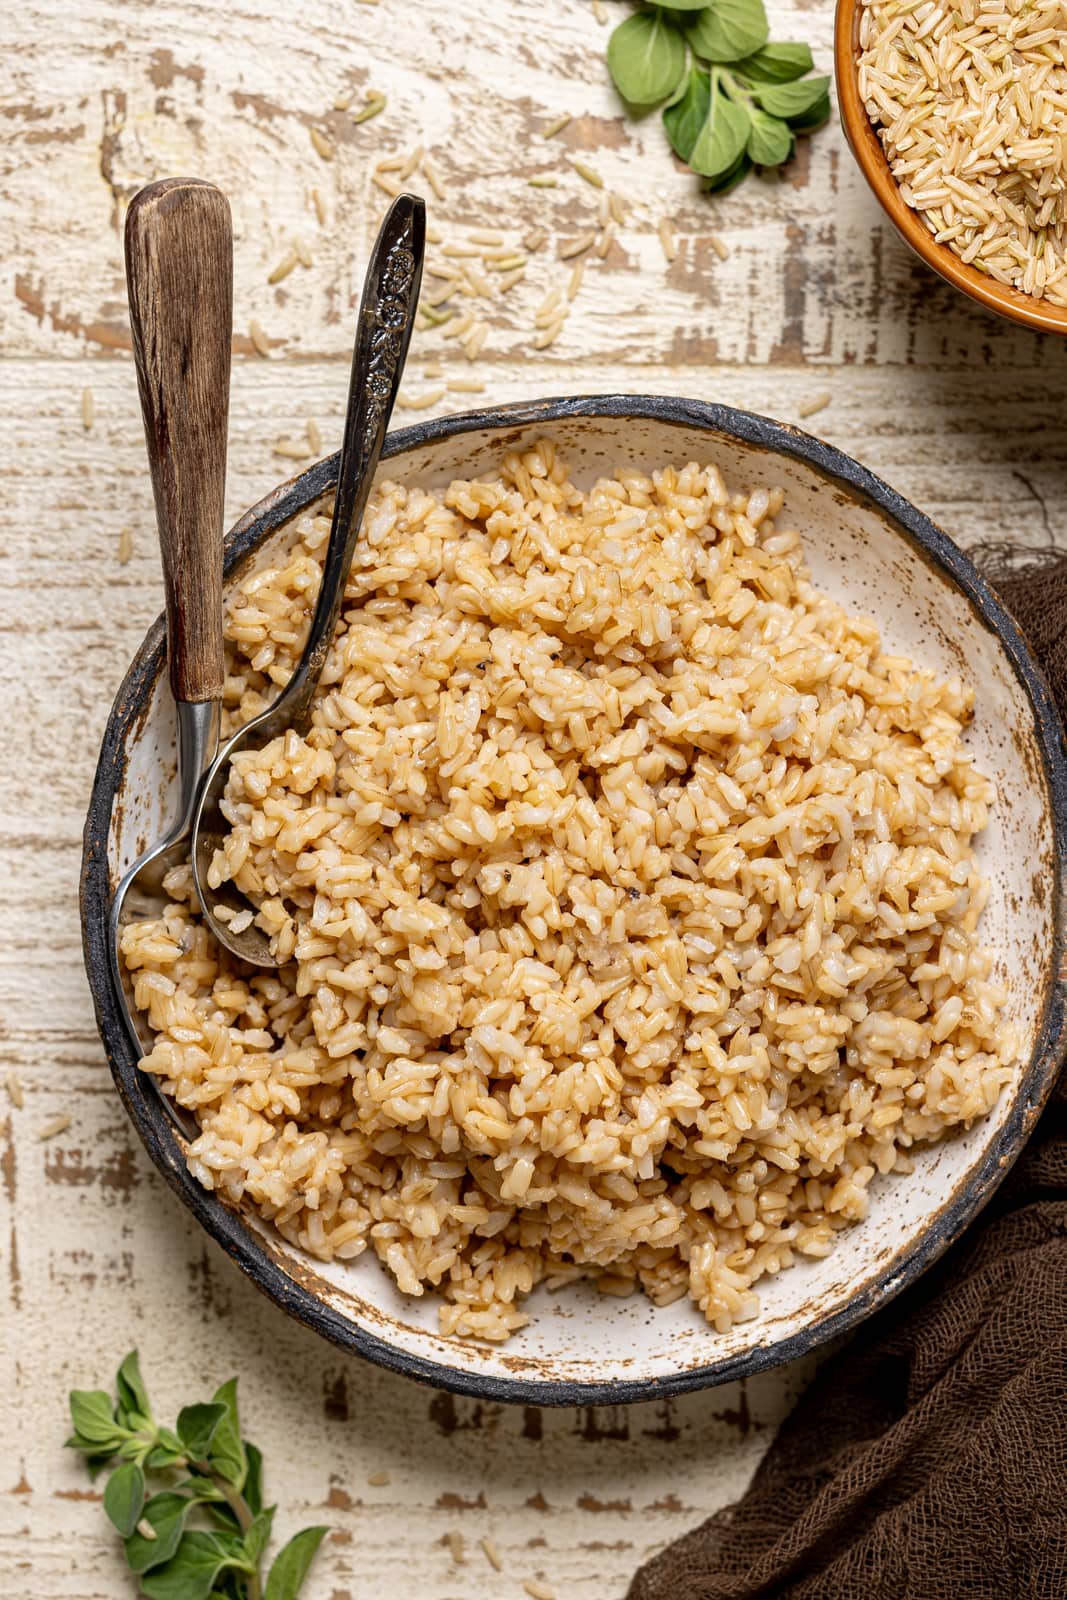 https://www.orchidsandsweettea.com/wp-content/uploads/2023/09/How-to-Cook-Brown-Rice-7.jpg